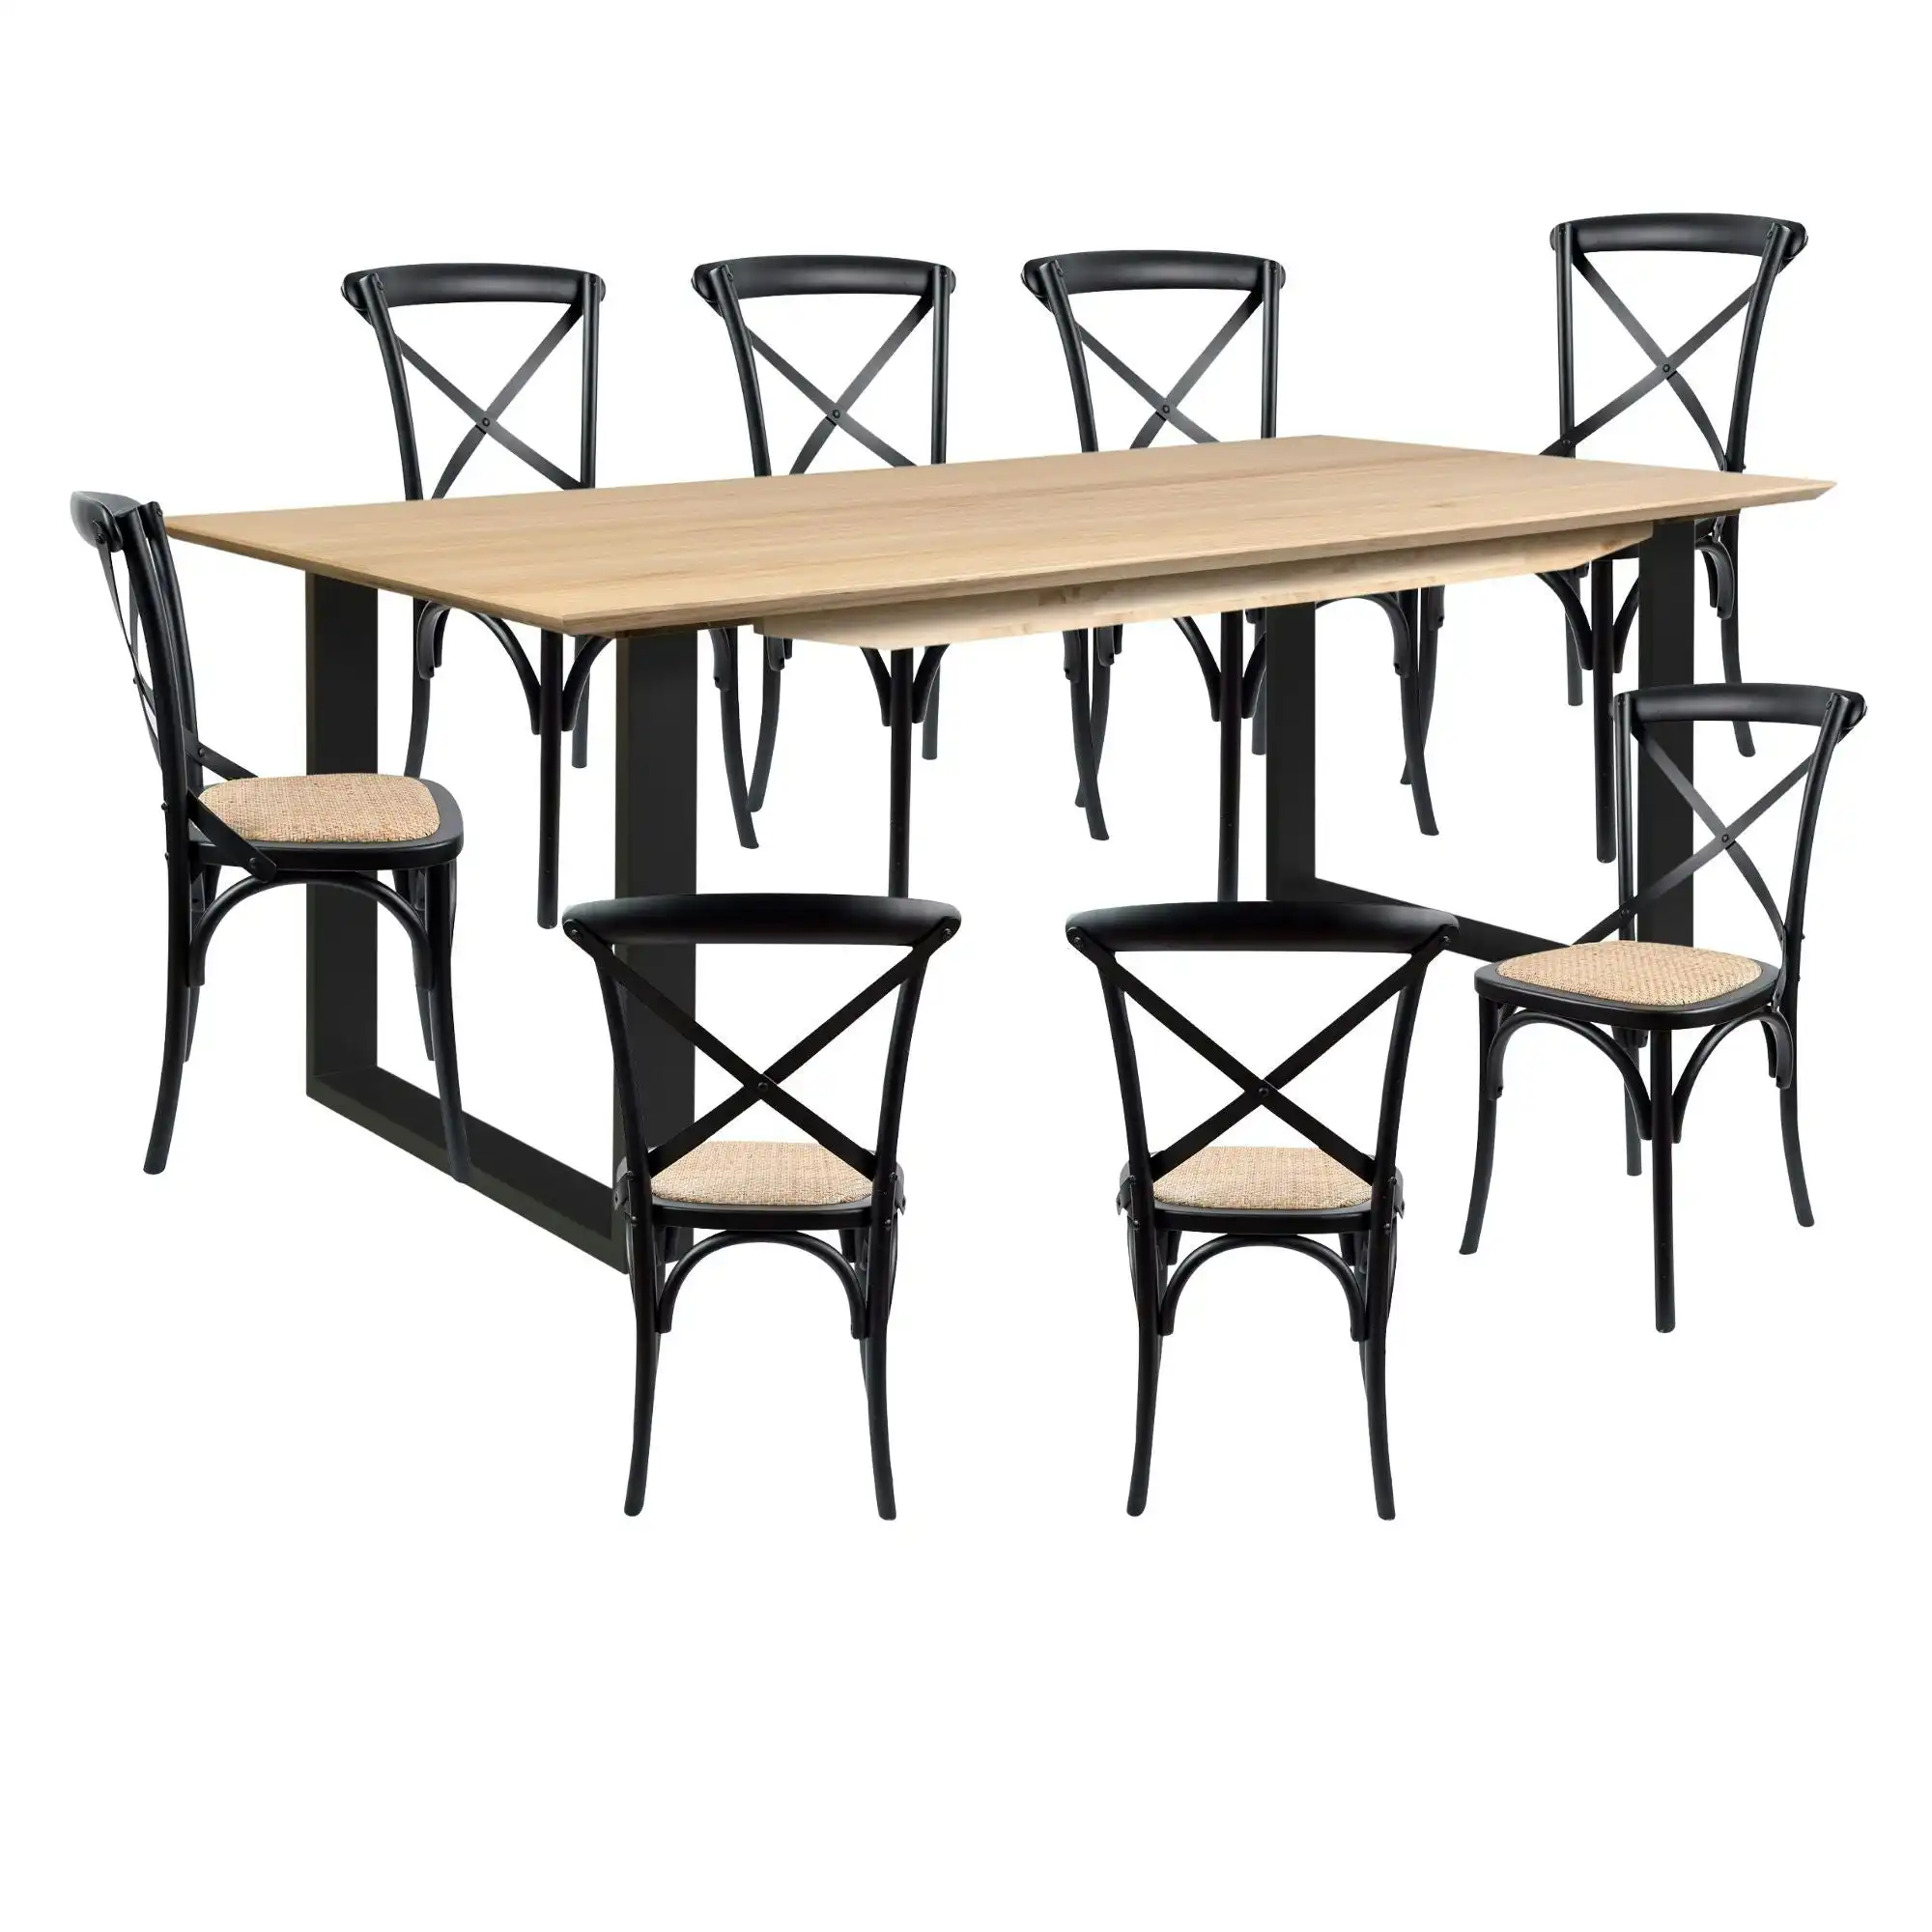 Aconite 9pc 210cm Dining Table X-back Chair Set